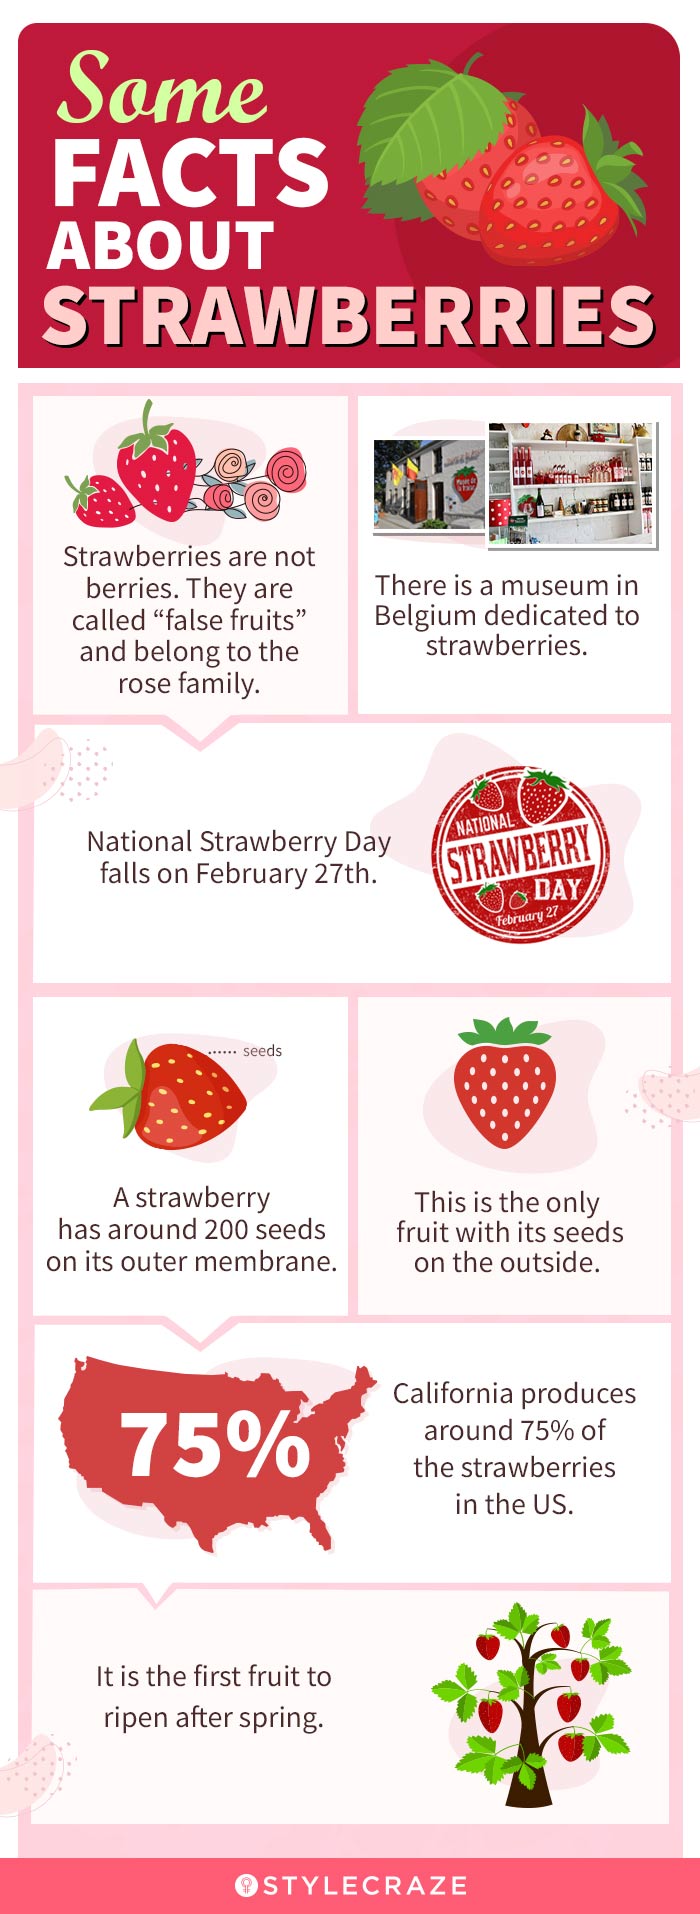 some facts about strawberries [infographic]